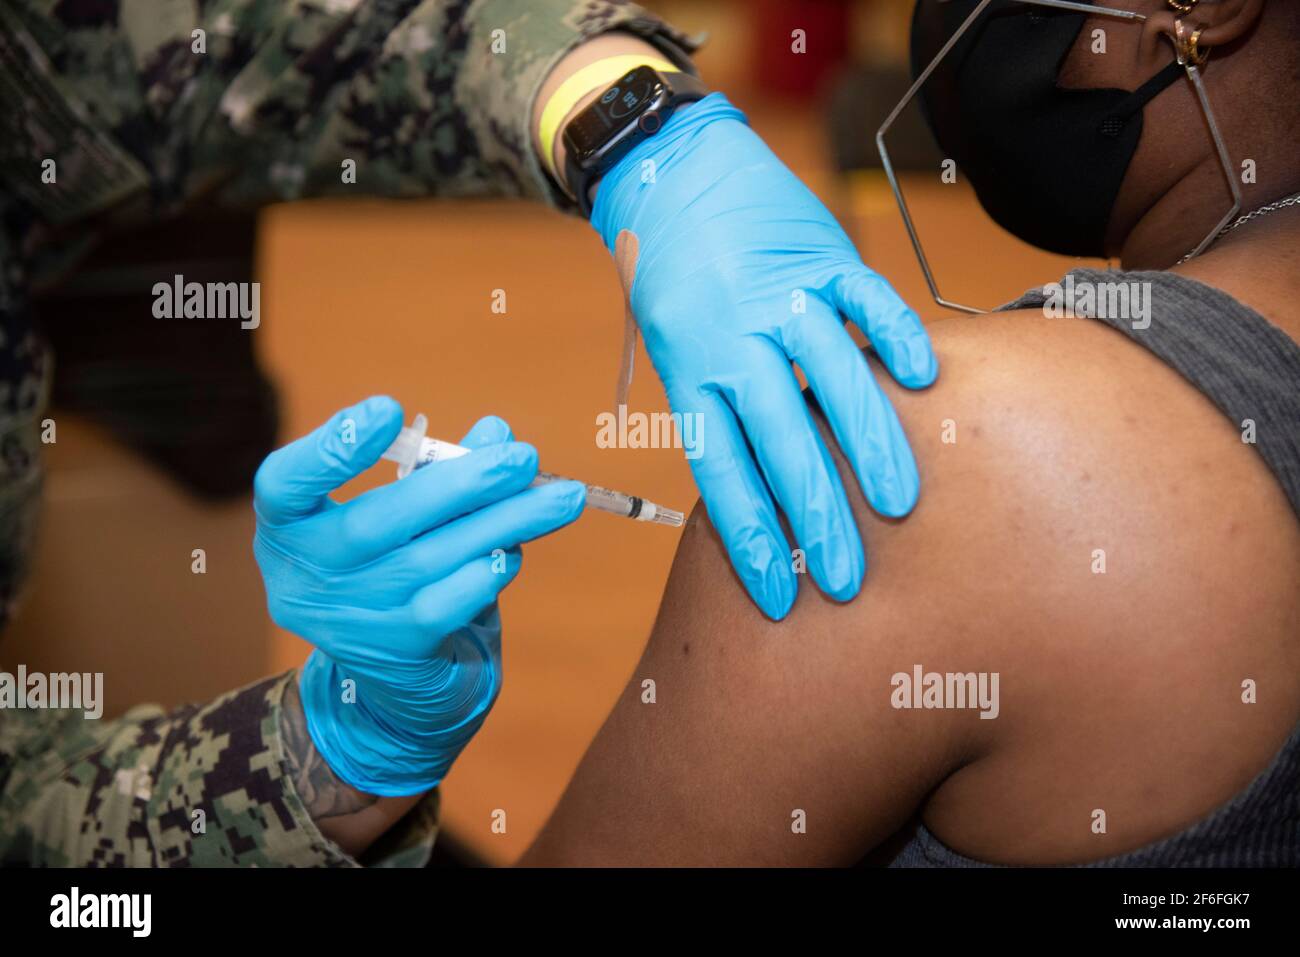 Norfolk VA ,March 31,2021- Getting a COVID-19 vaccine is happening more and more.  Patsy Lynch/Alamay Stock Photo